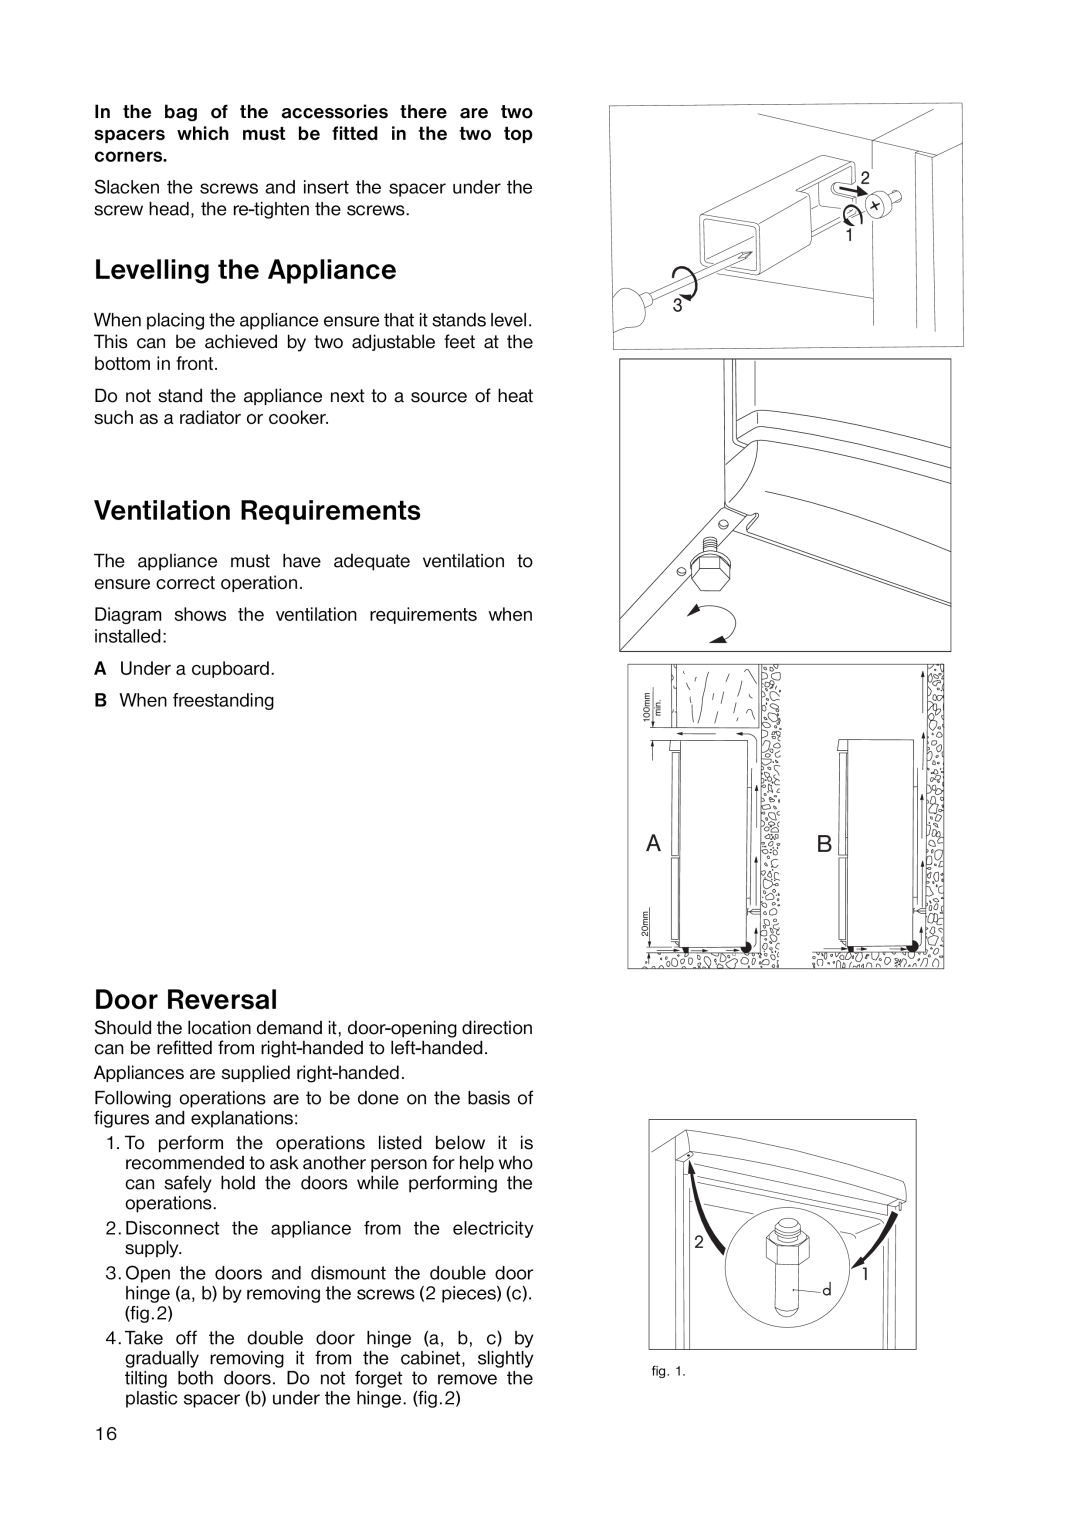 Electrolux ENB 3440 manual Levelling the Appliance, Ventilation Requirements, Door Reversal 